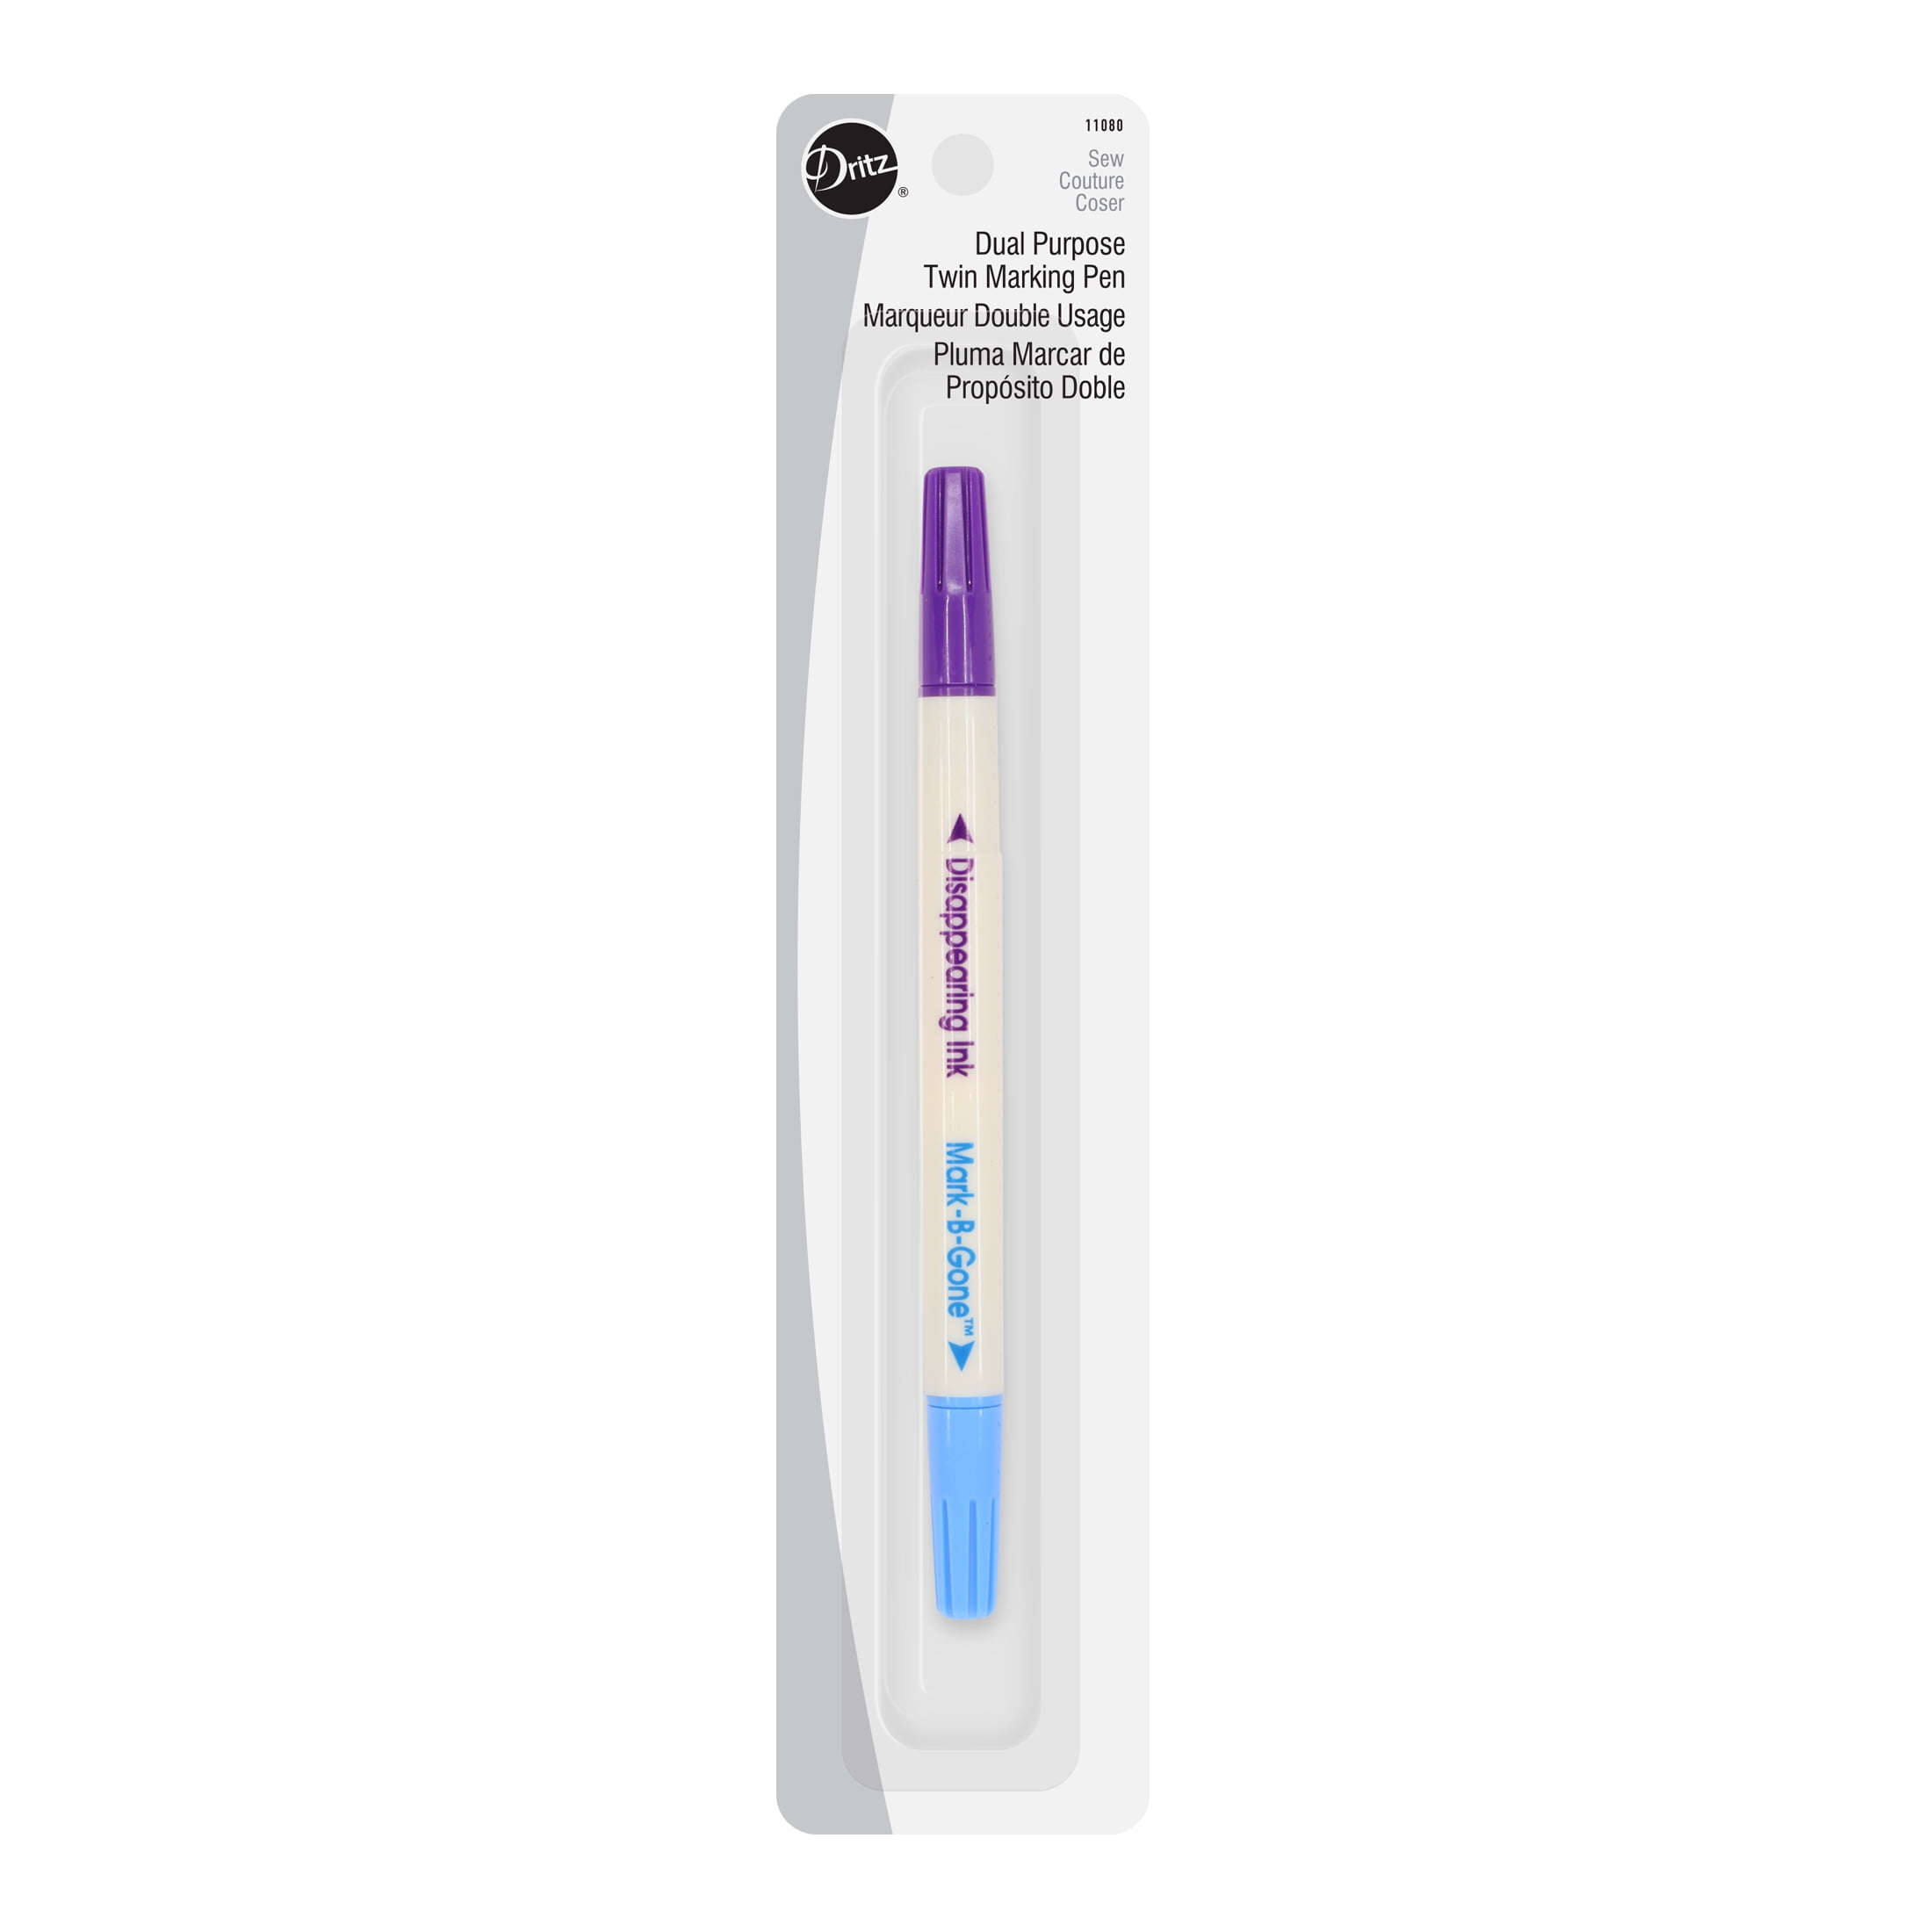 EZ International Quilter'S Disappearing Ink Pen